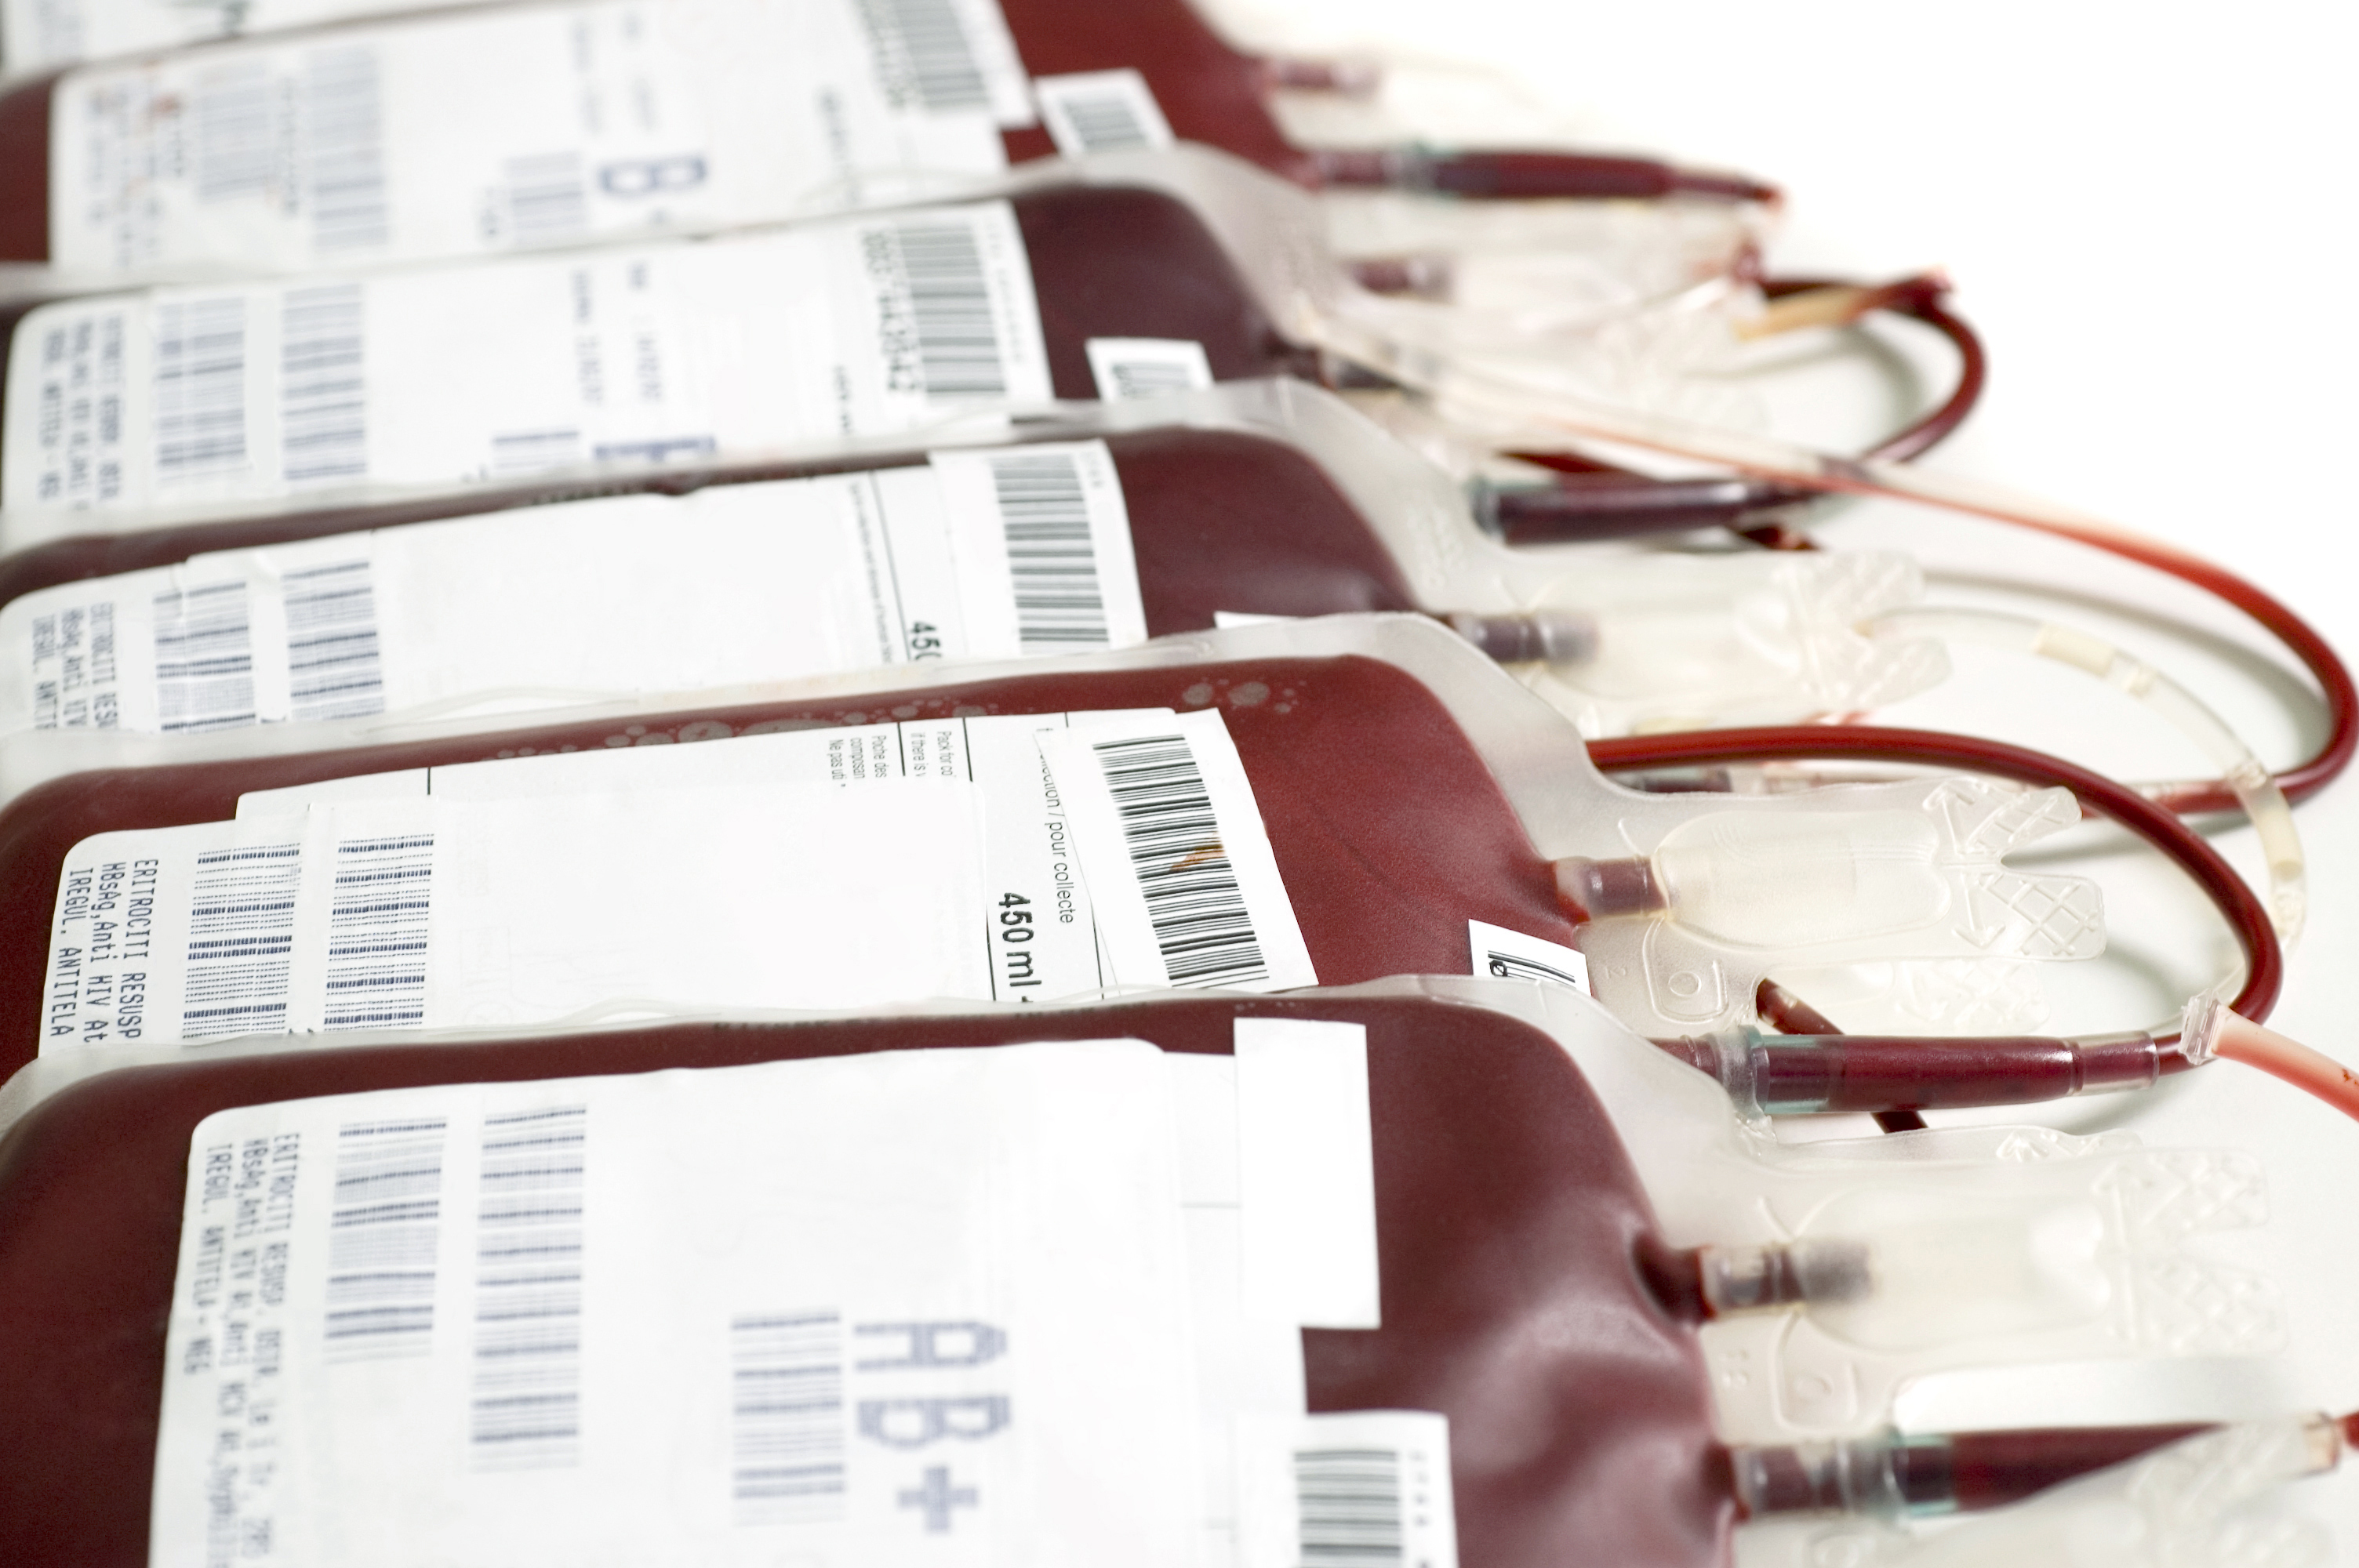 Blood ready for transfusion